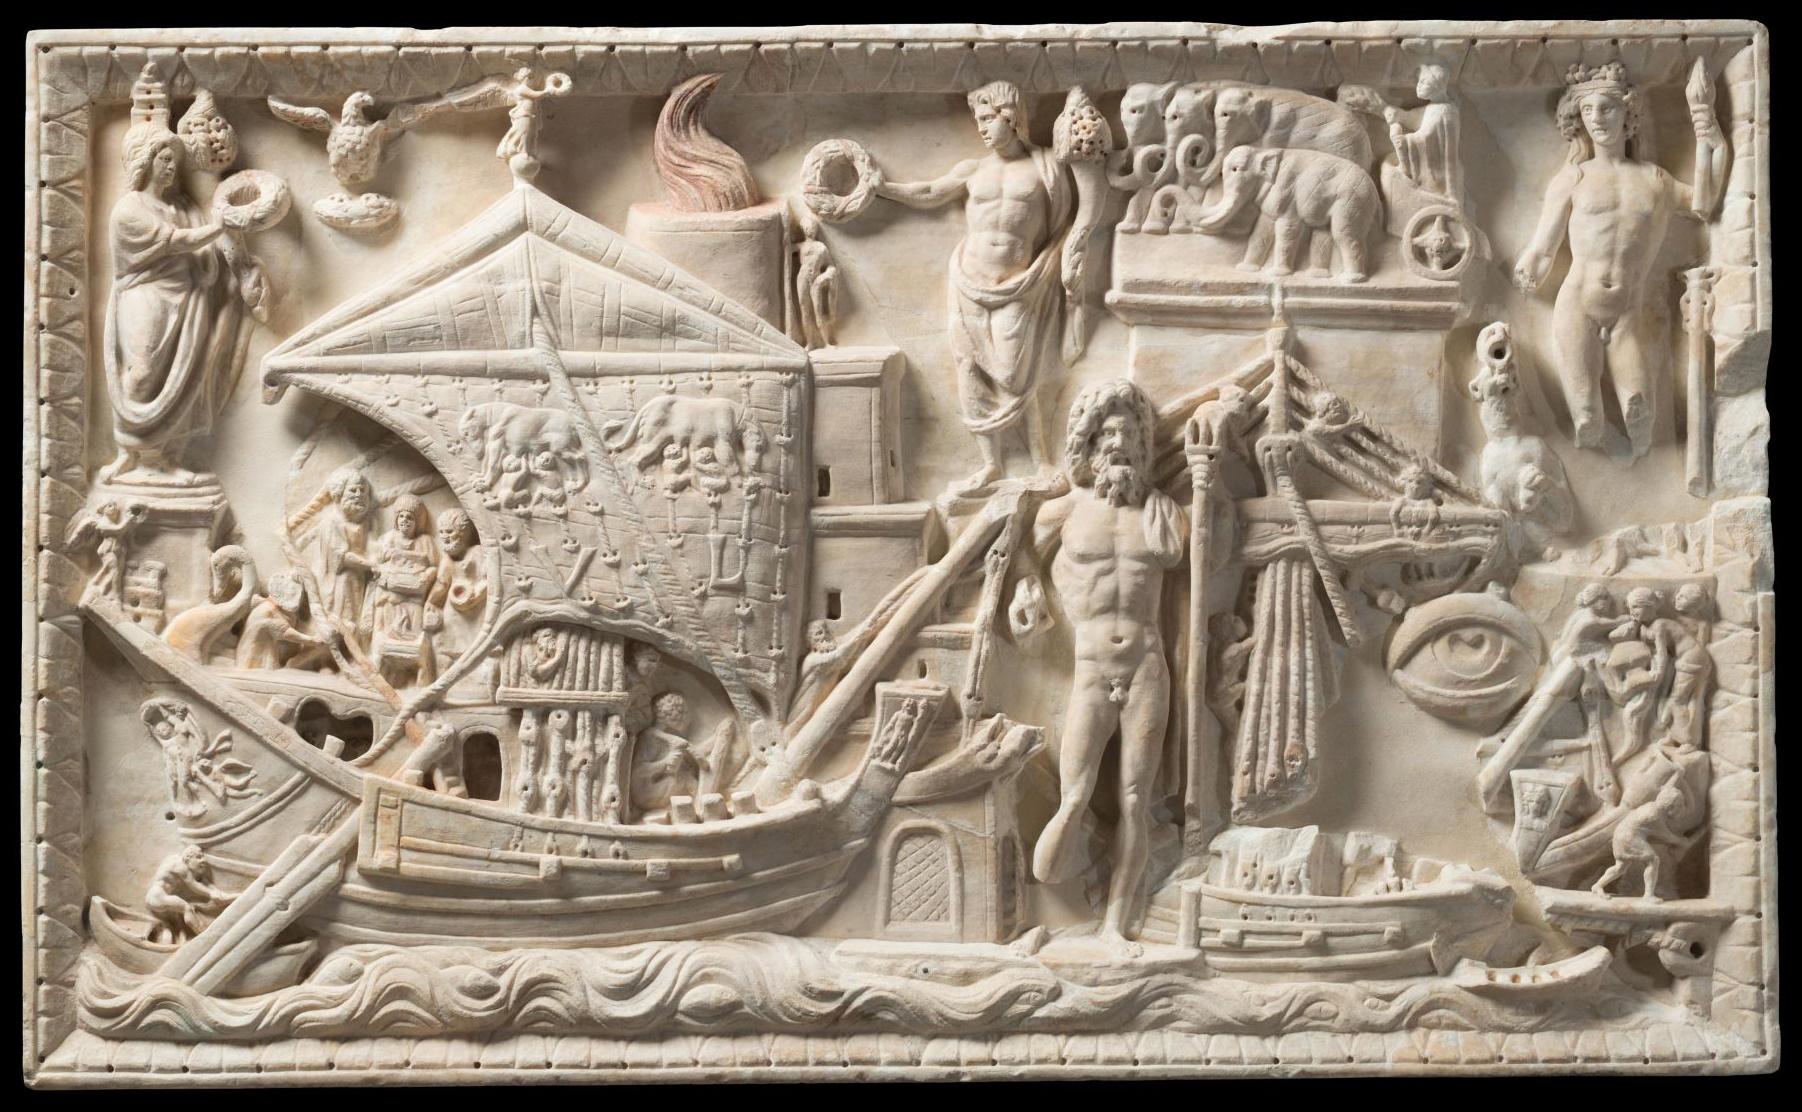 Marble bas-relief depicting scenes at the Portus Augusti [Rome's harbour]. Roman imperial era. From Torlonia collection, MT 430.jpg